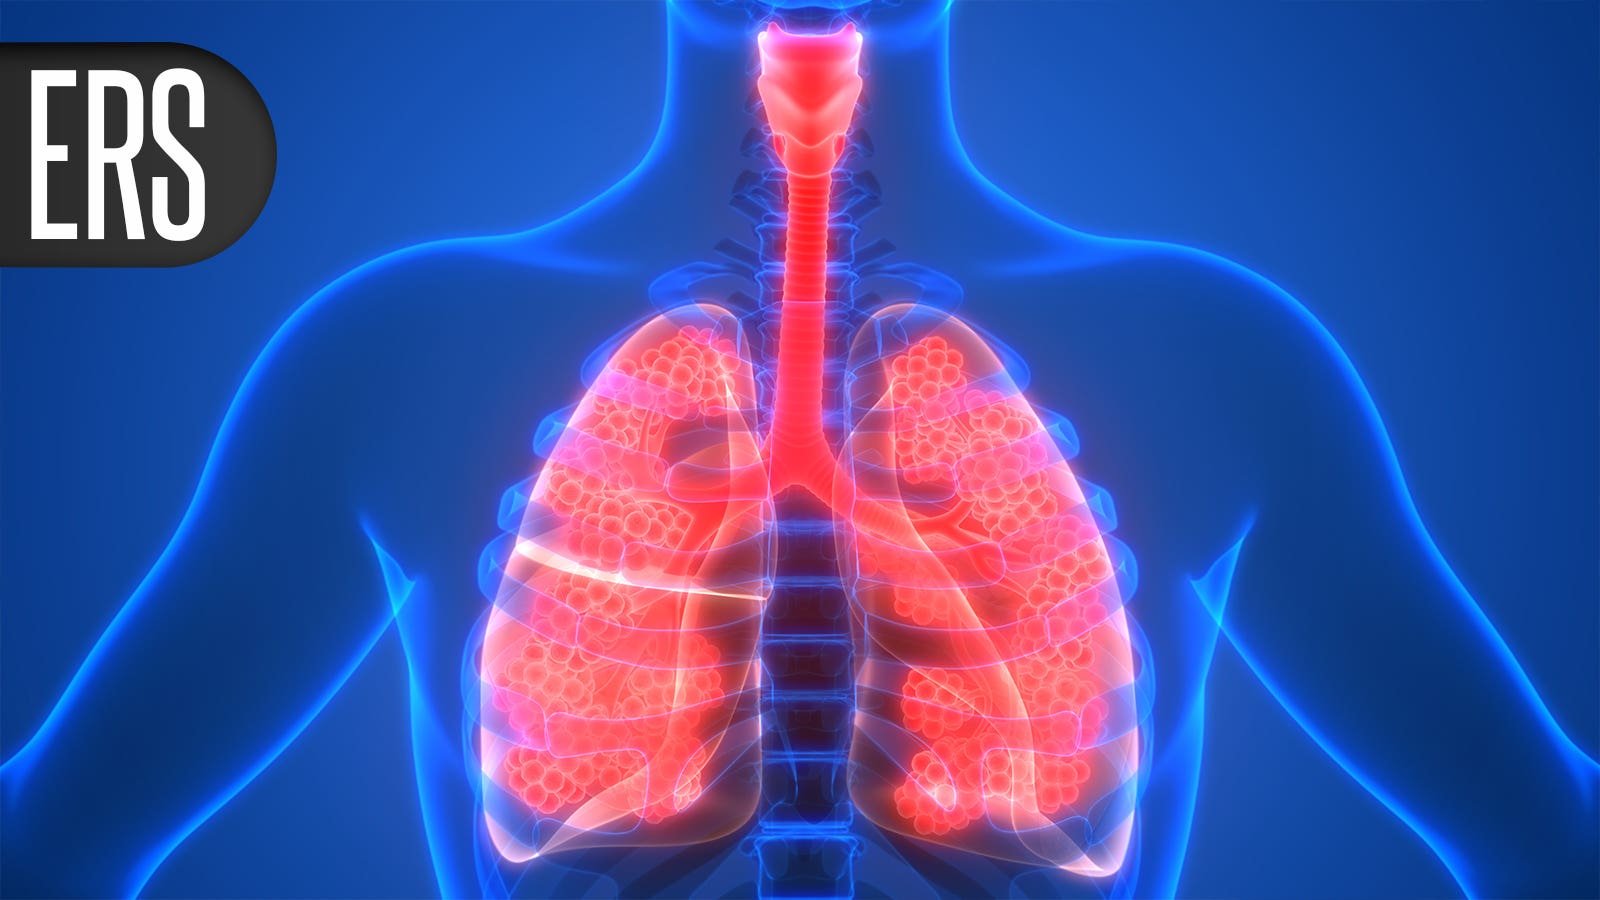 Focused on Bacteria in COPD Reveals Promise